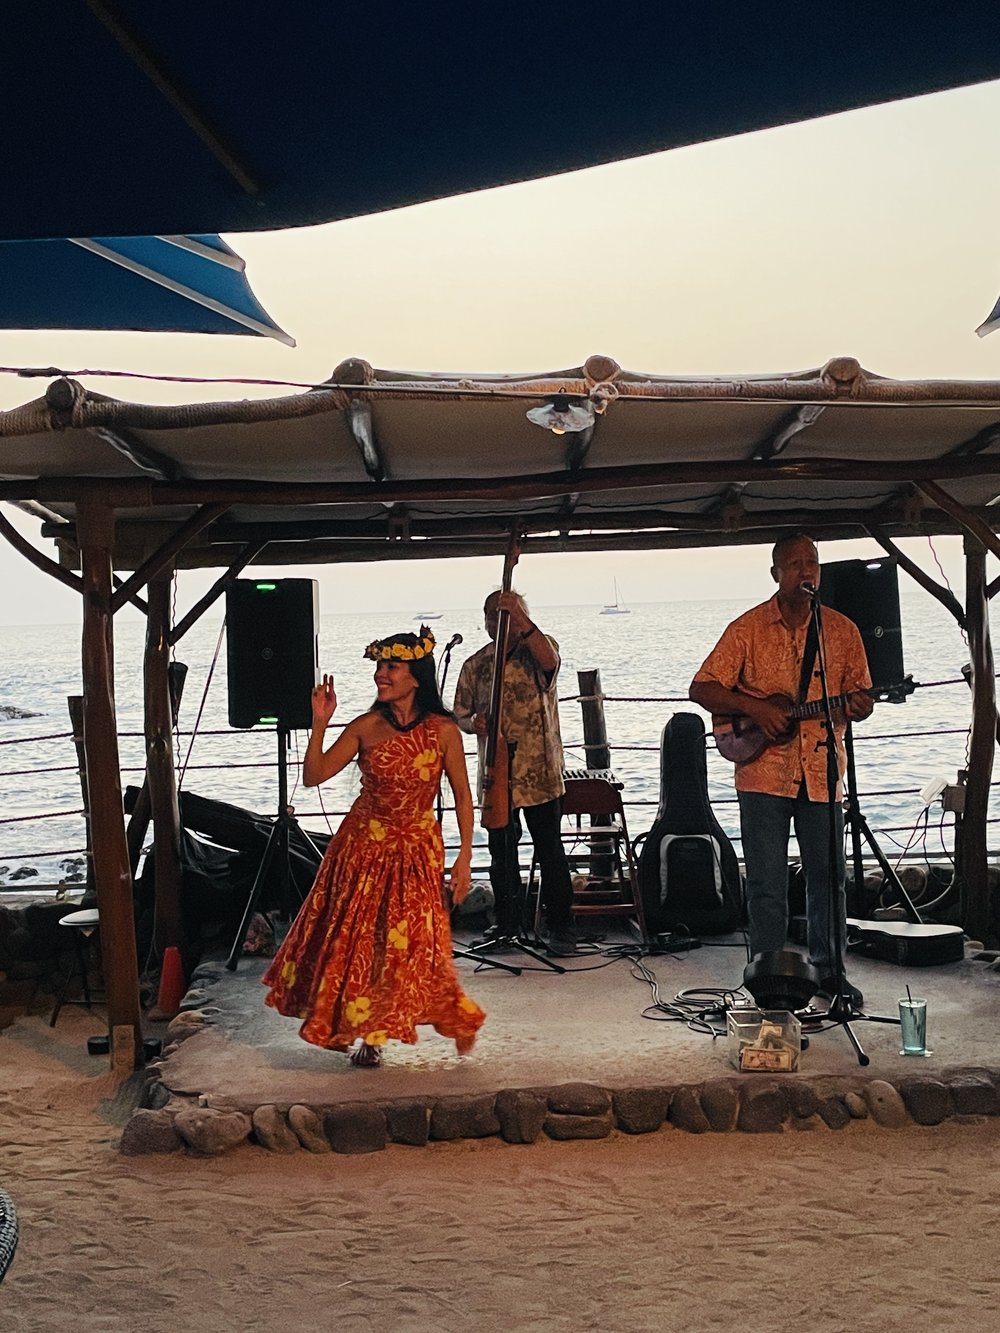 Live Music and Dancing at Sunset!